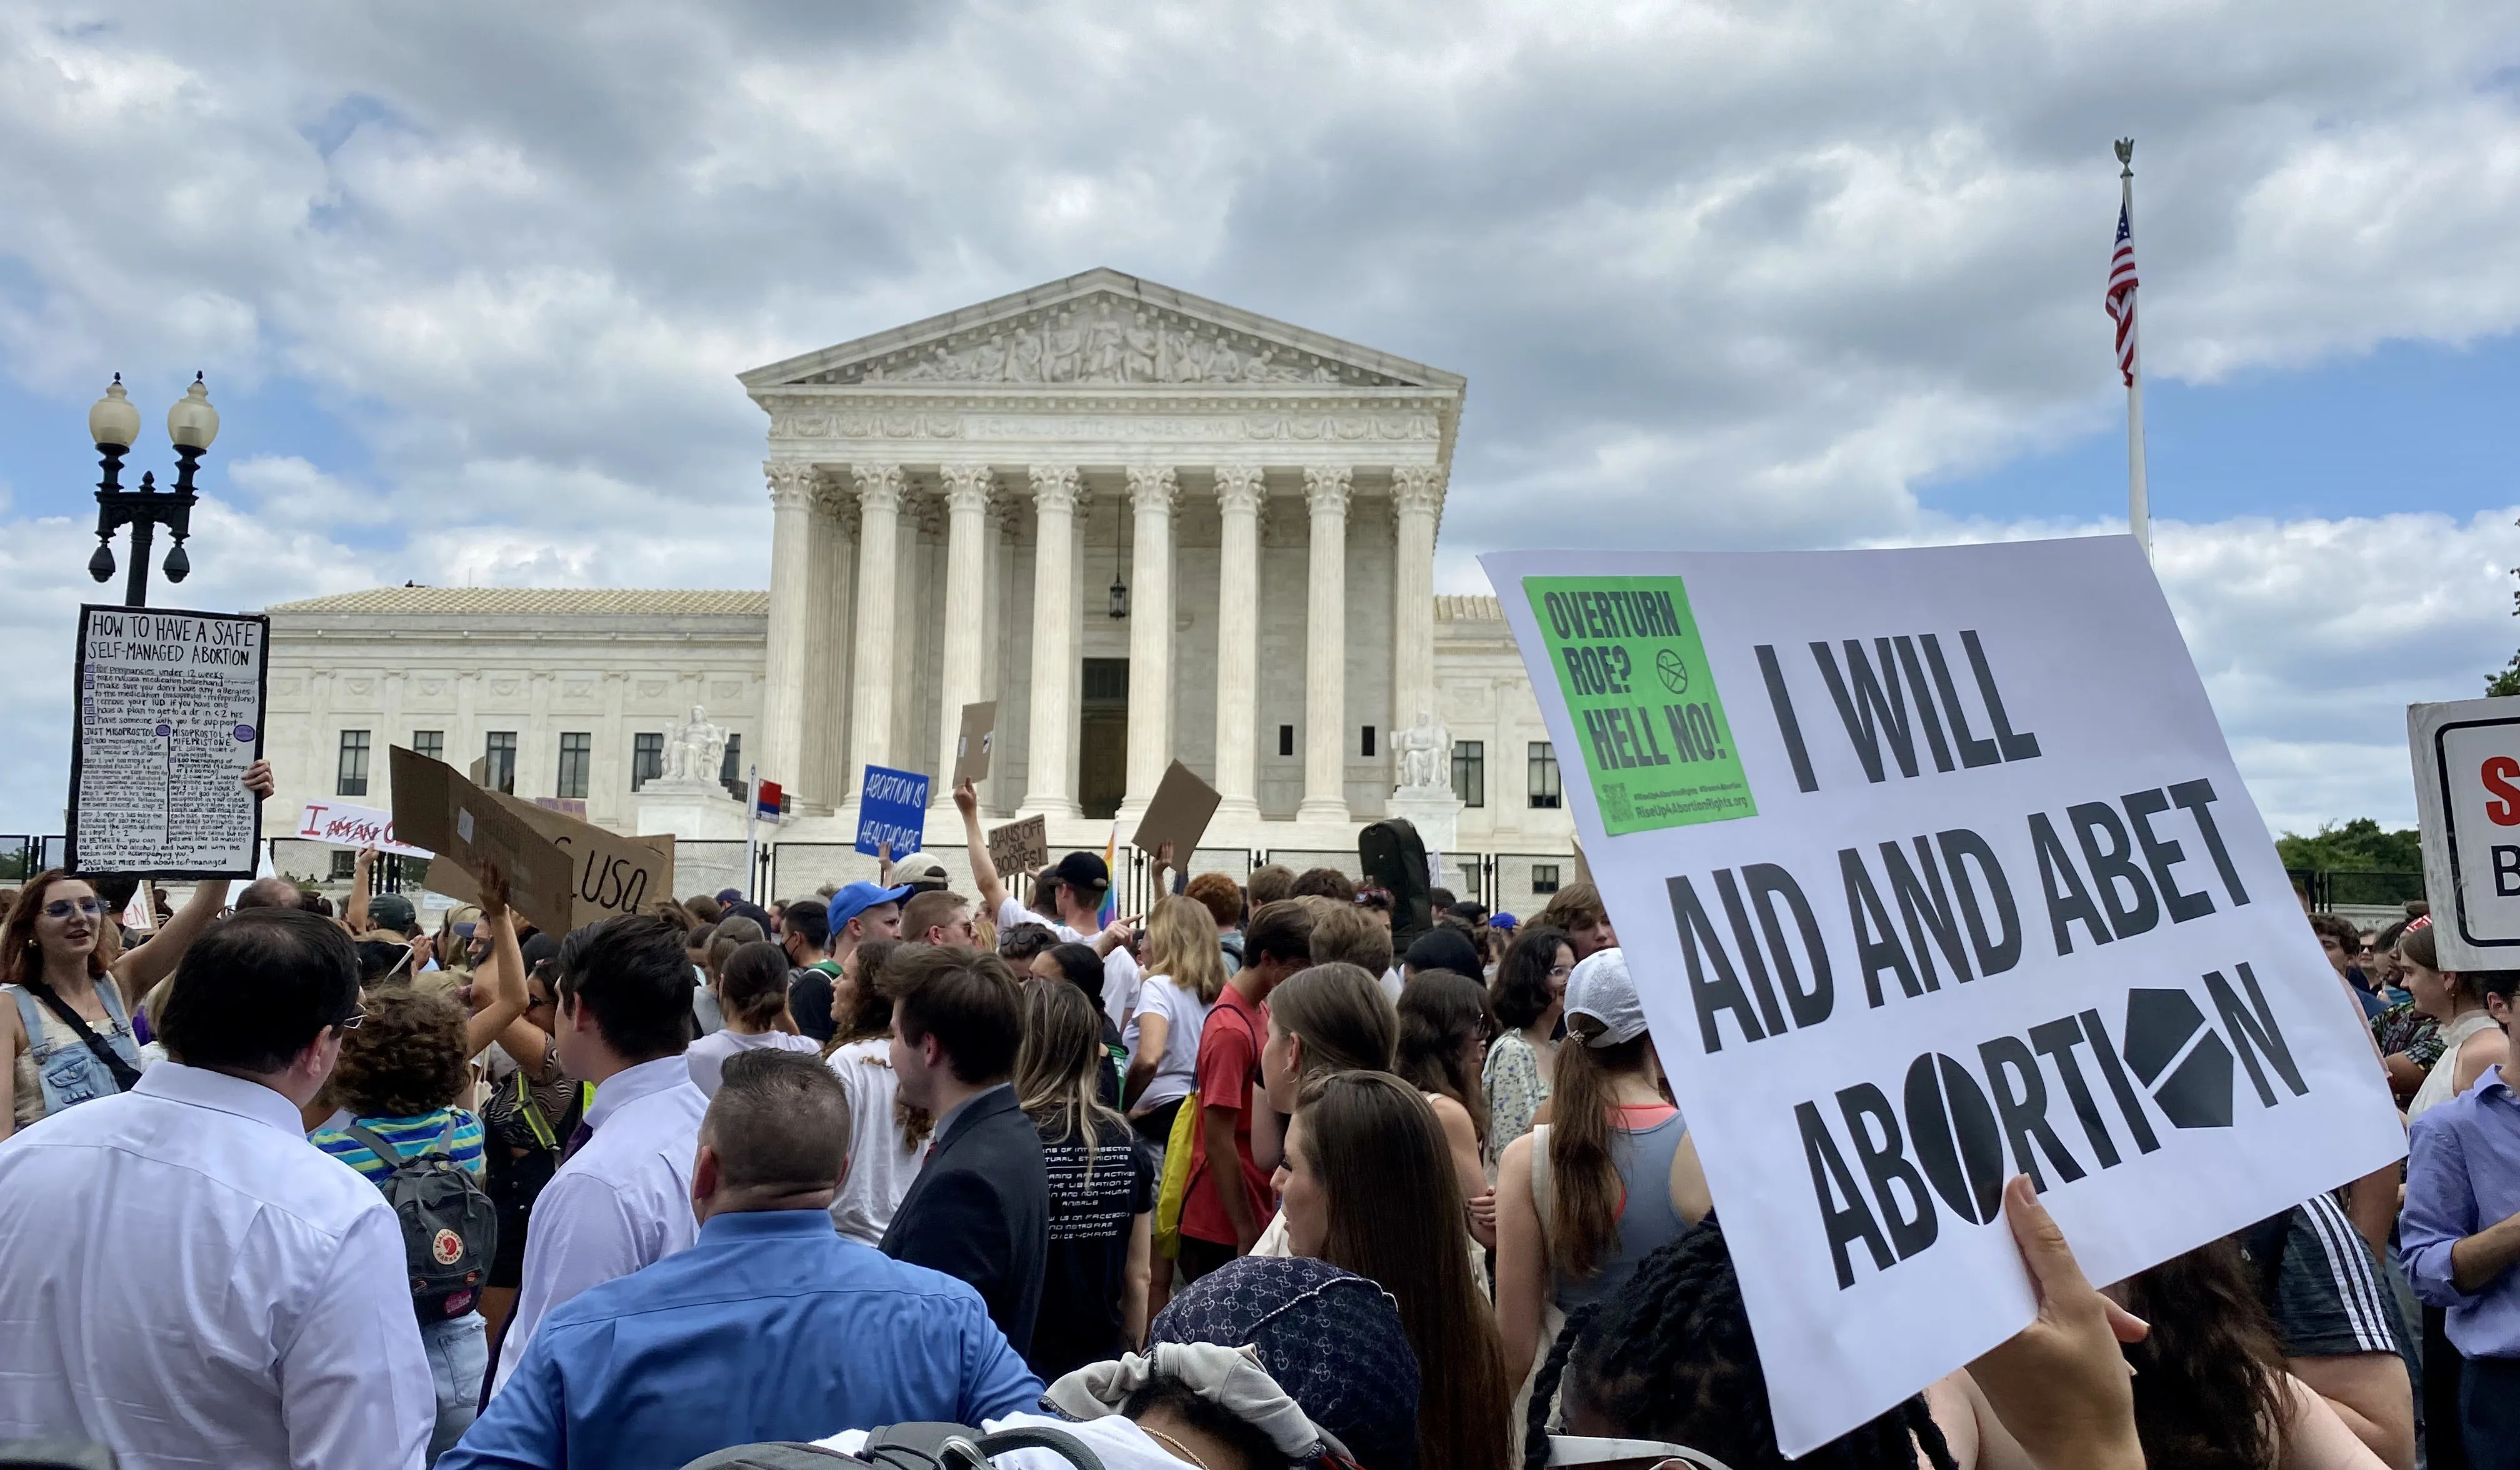 The scene outside the U.S. Supreme Court in Washington, D.C., after the court released its decision in the Dobbs abortion case, June 24, 2022.?w=200&h=150